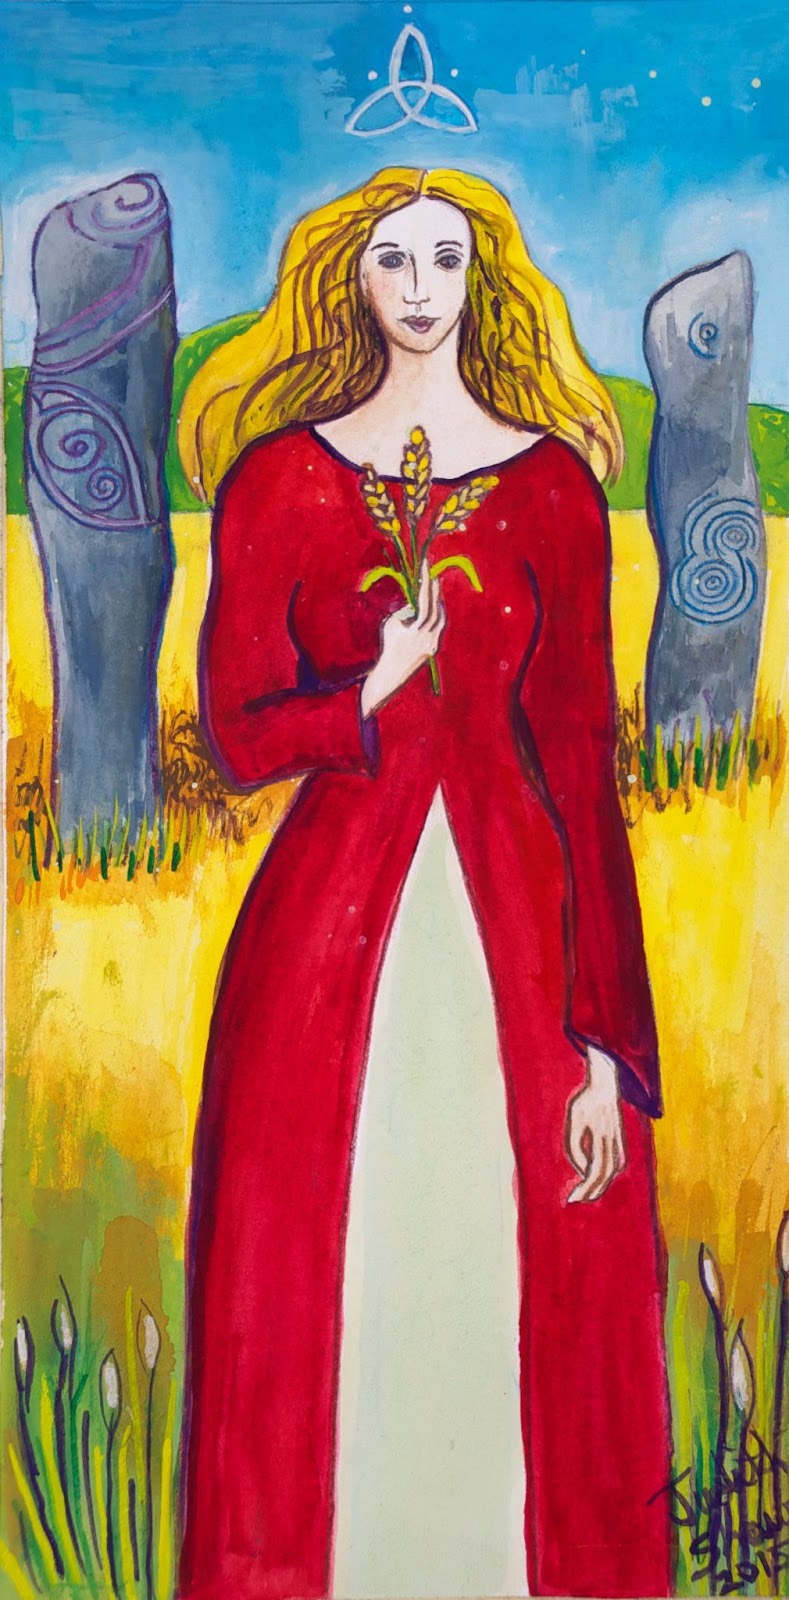 Aine is wearing a red dress standing in front of a golden grain fields. She is holding three strand of grain in her hand. Behind her, there are ancient Celtic rocks with ruins on them.